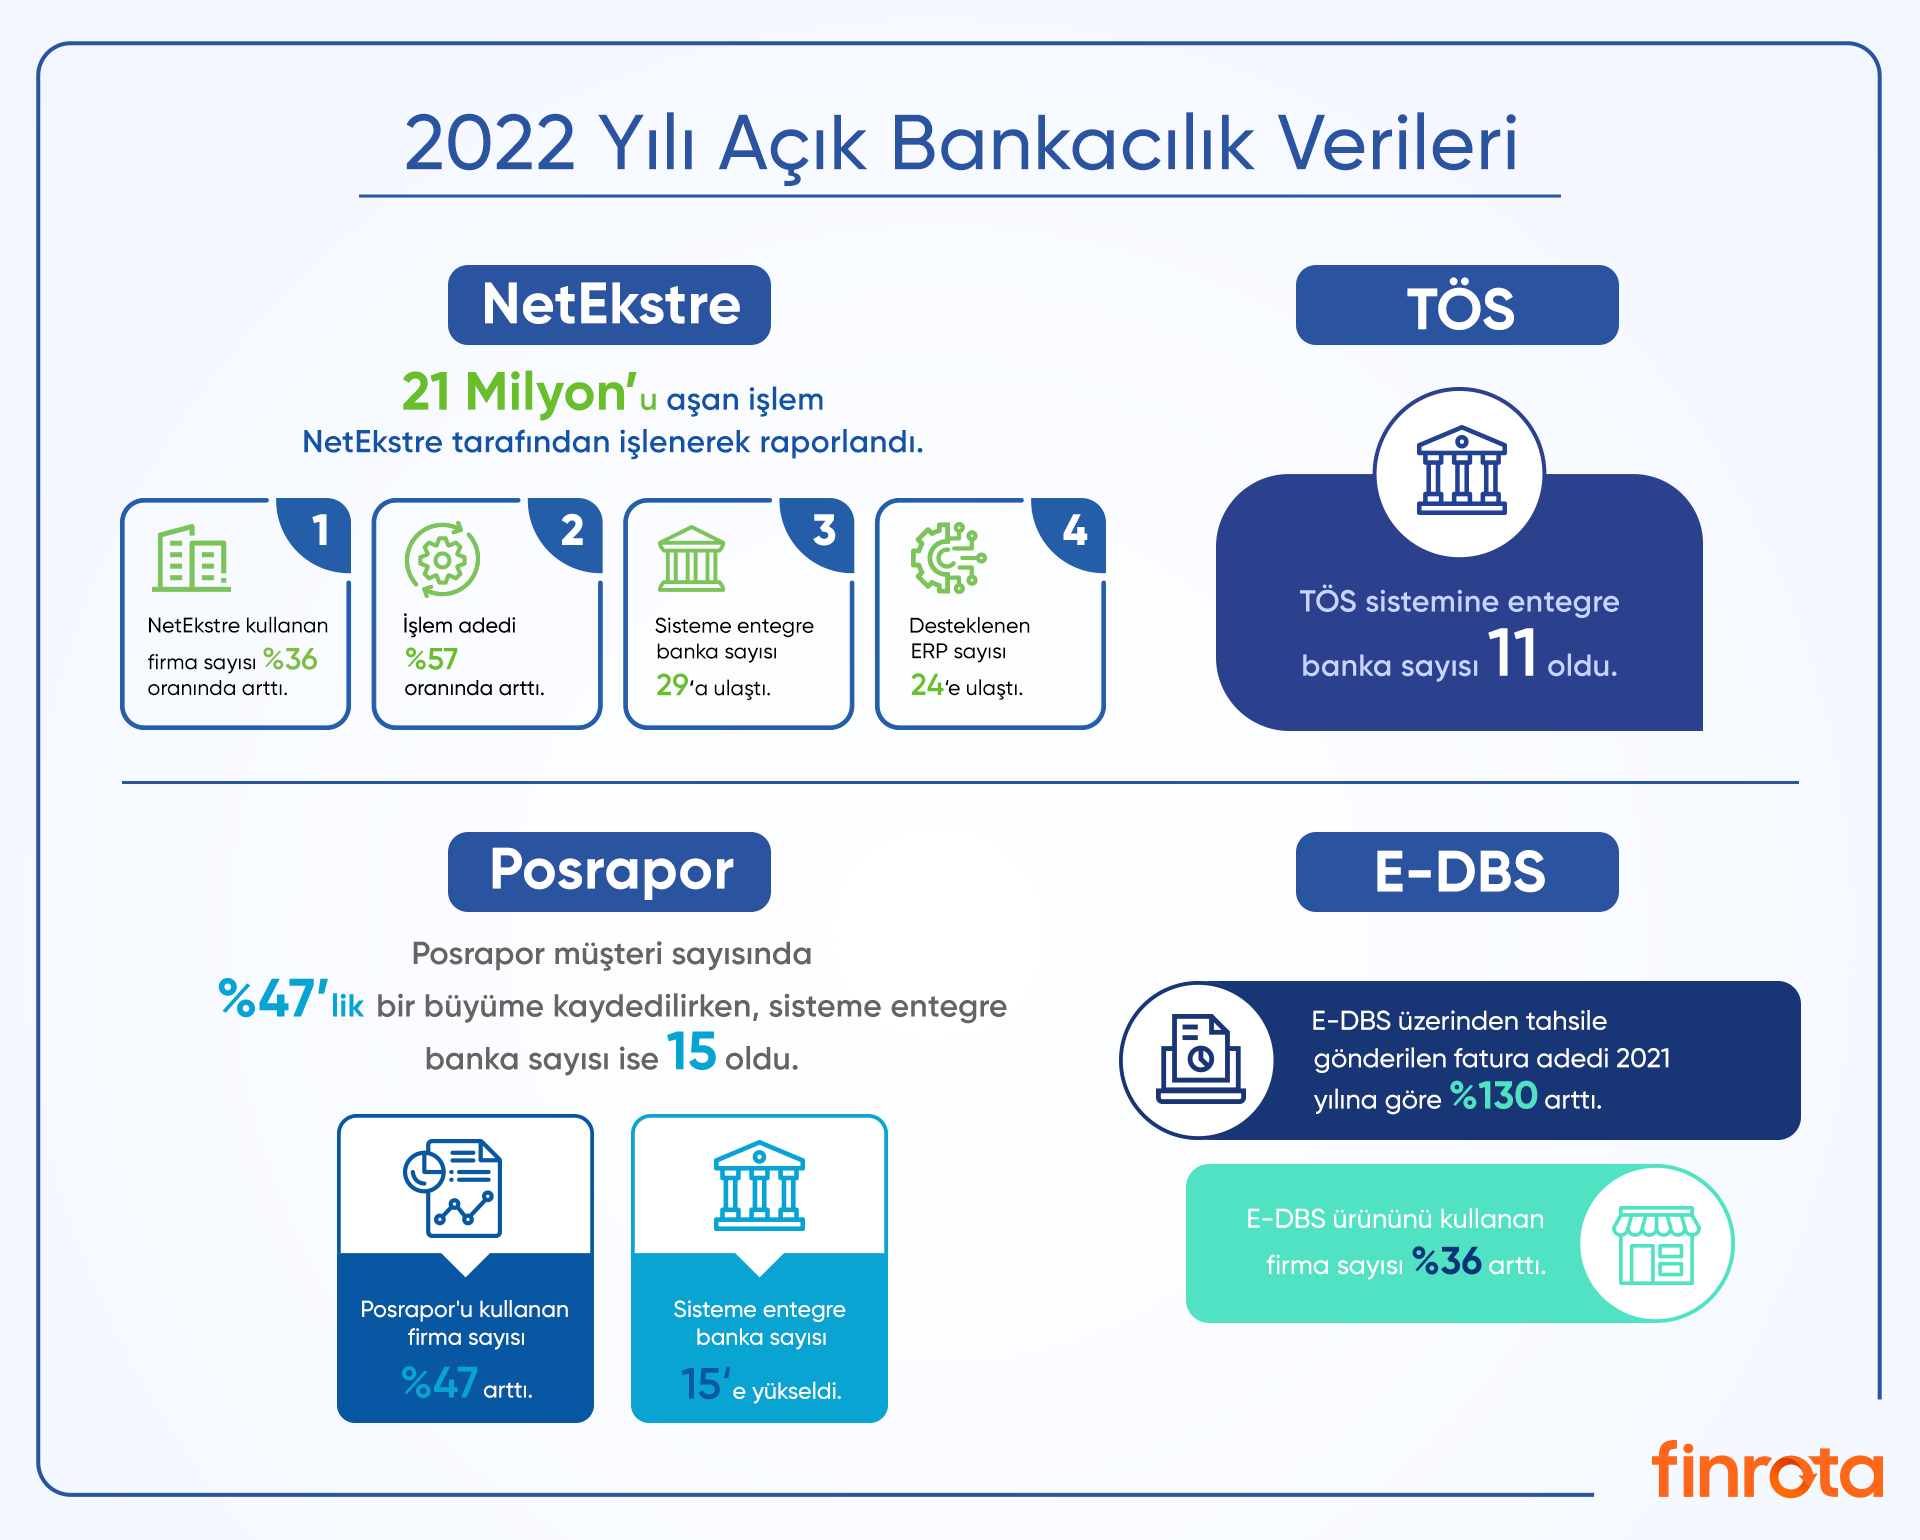 The number of account transactions processed and reported in NetEkstre, the Open Banking Product, exceeded 21 million in 2022.